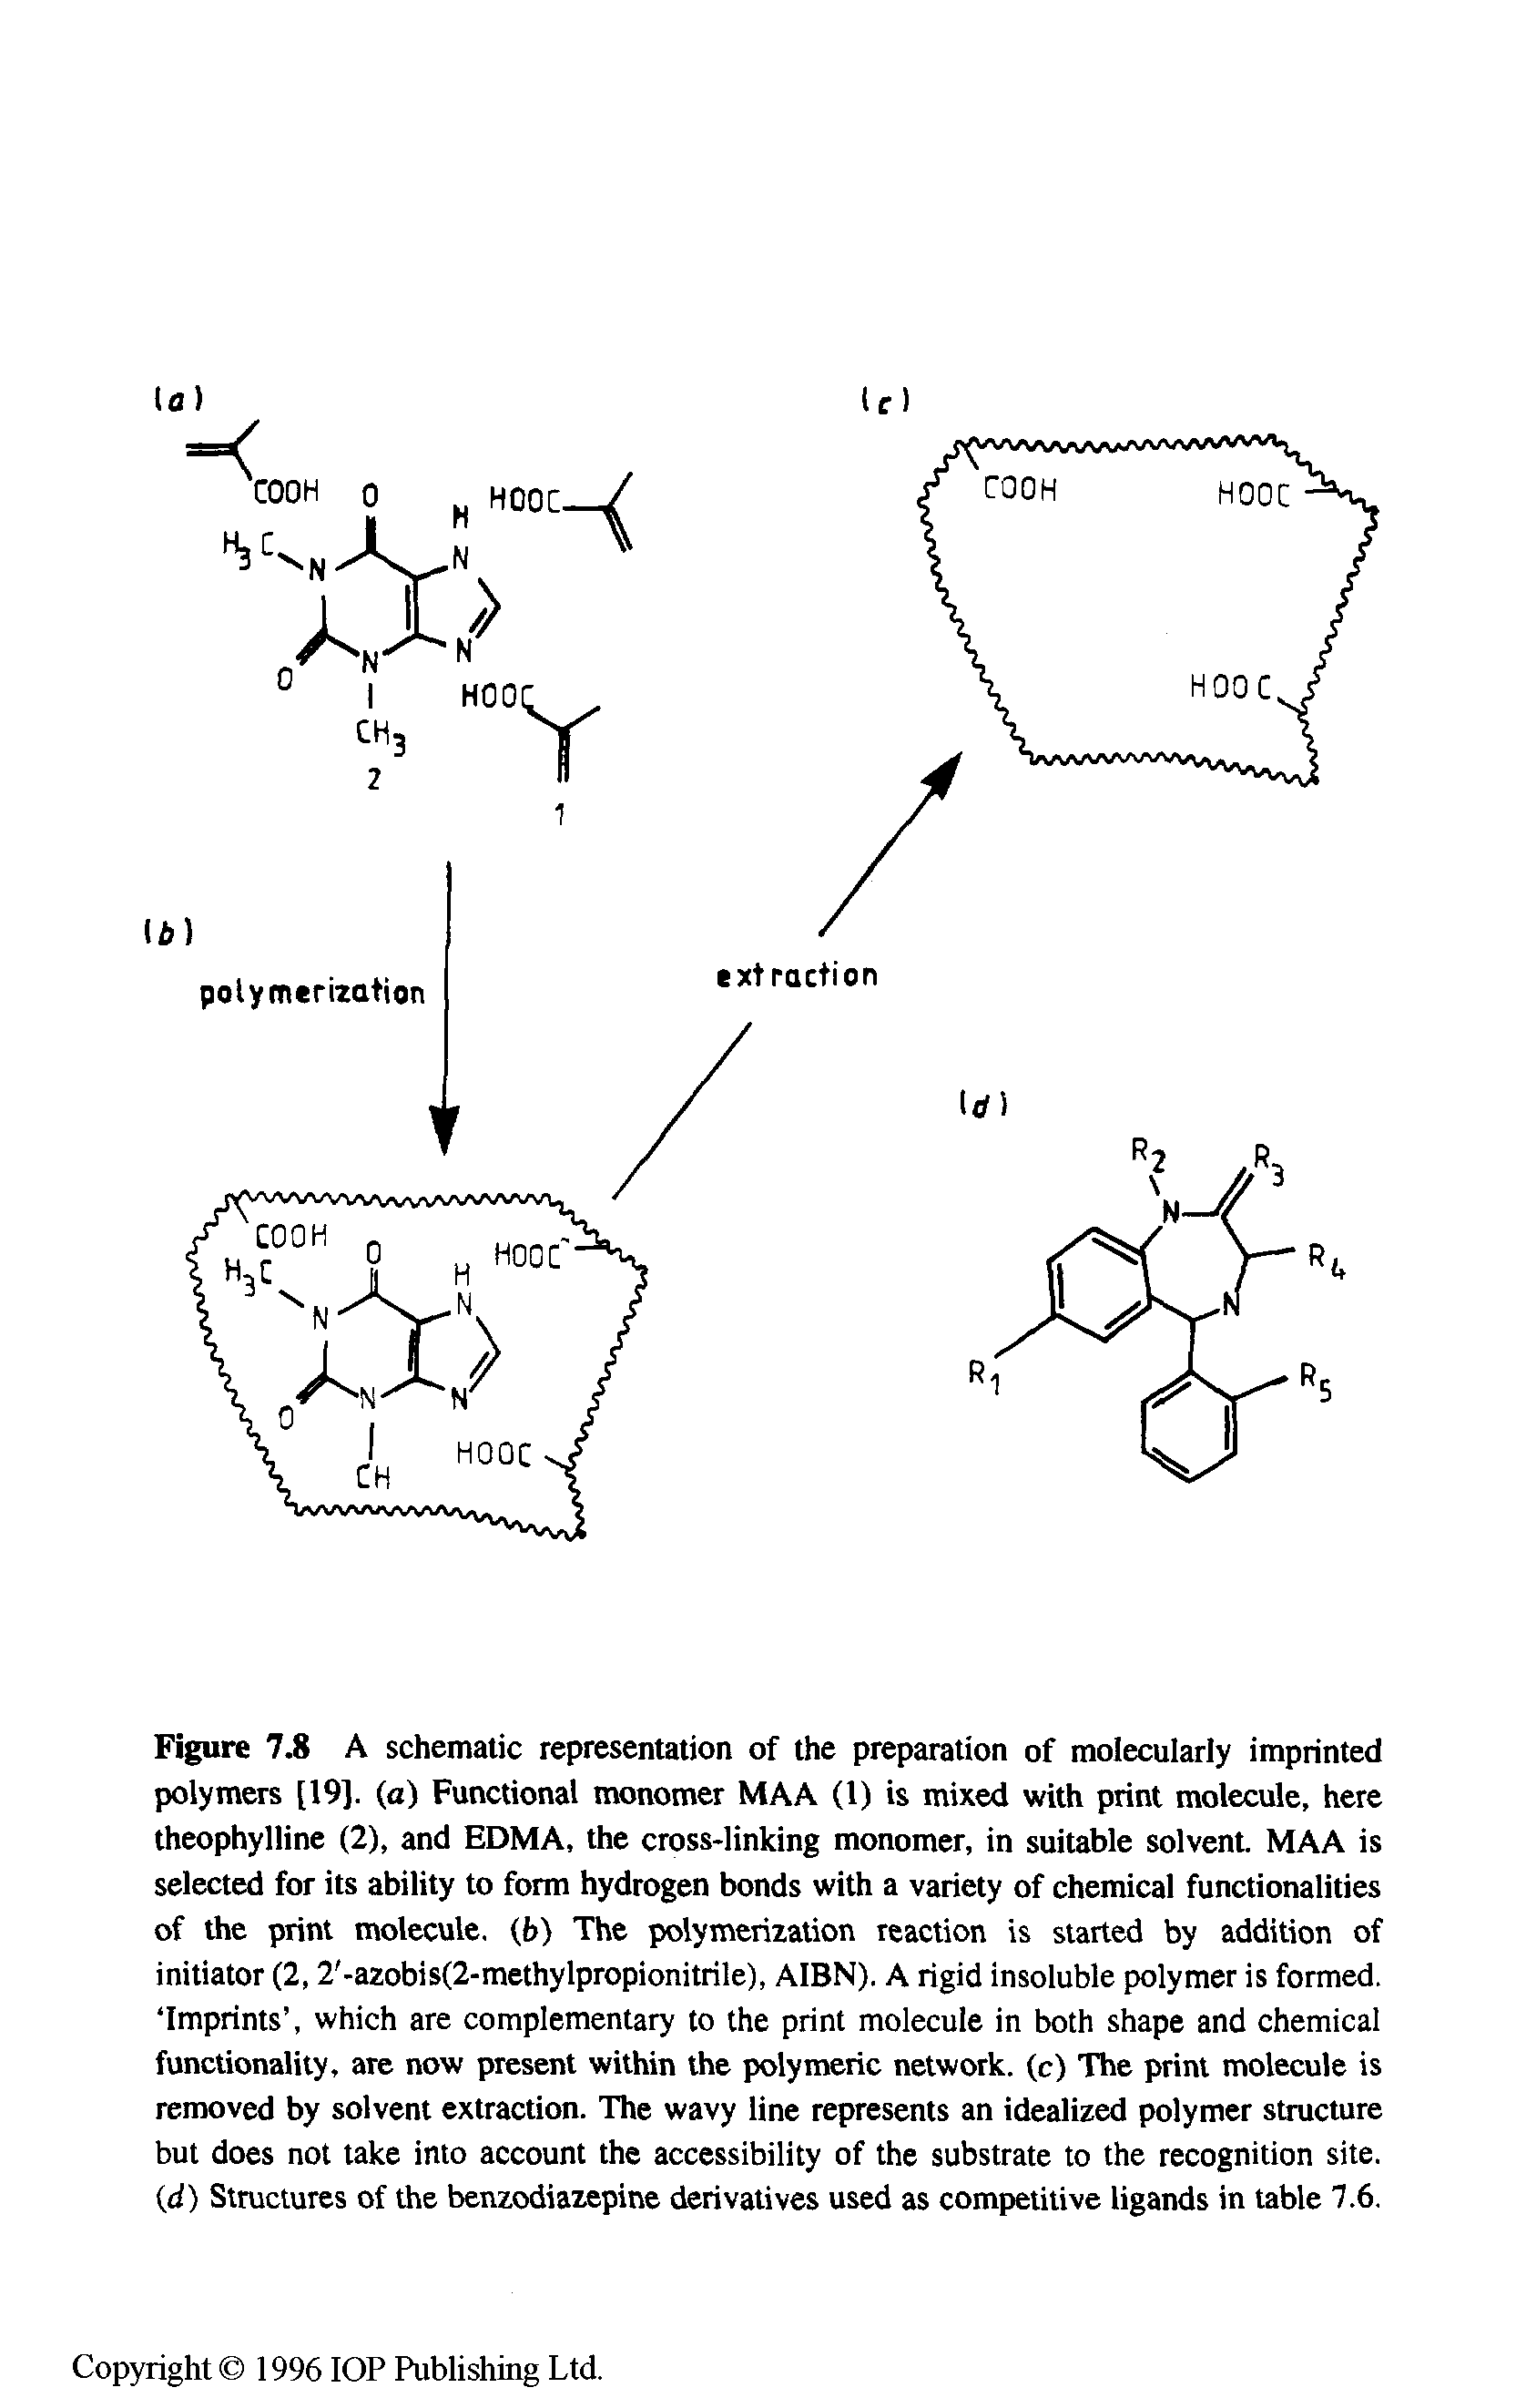 Figure 7.8 A schematic representation of the preparation of molecularly imprinted polymers [19]. (a) Functional monomer MAA (1) is mixed with print molecule, here theophylline (2), and EDMA, the cross-linking monomer, in suitable solvent. MAA is selected for its ability to form hydrogen bonds with a variety of chemical functionalities of the print molecule. (6) The polymerization reaction is started by addition of initiator (2,2 -azobis(2-methylpropionitrile), AIBN). A rigid insoluble polymer is formed, Imprints , which are complementary to the print molecule in both shape and chemical functionality, are now present within the polymeric network, (c) The print molecule is removed by solvent extraction. The wavy line represents an idealized polymer structure but does not take into account the accessibility of the substrate to the recognition site,...